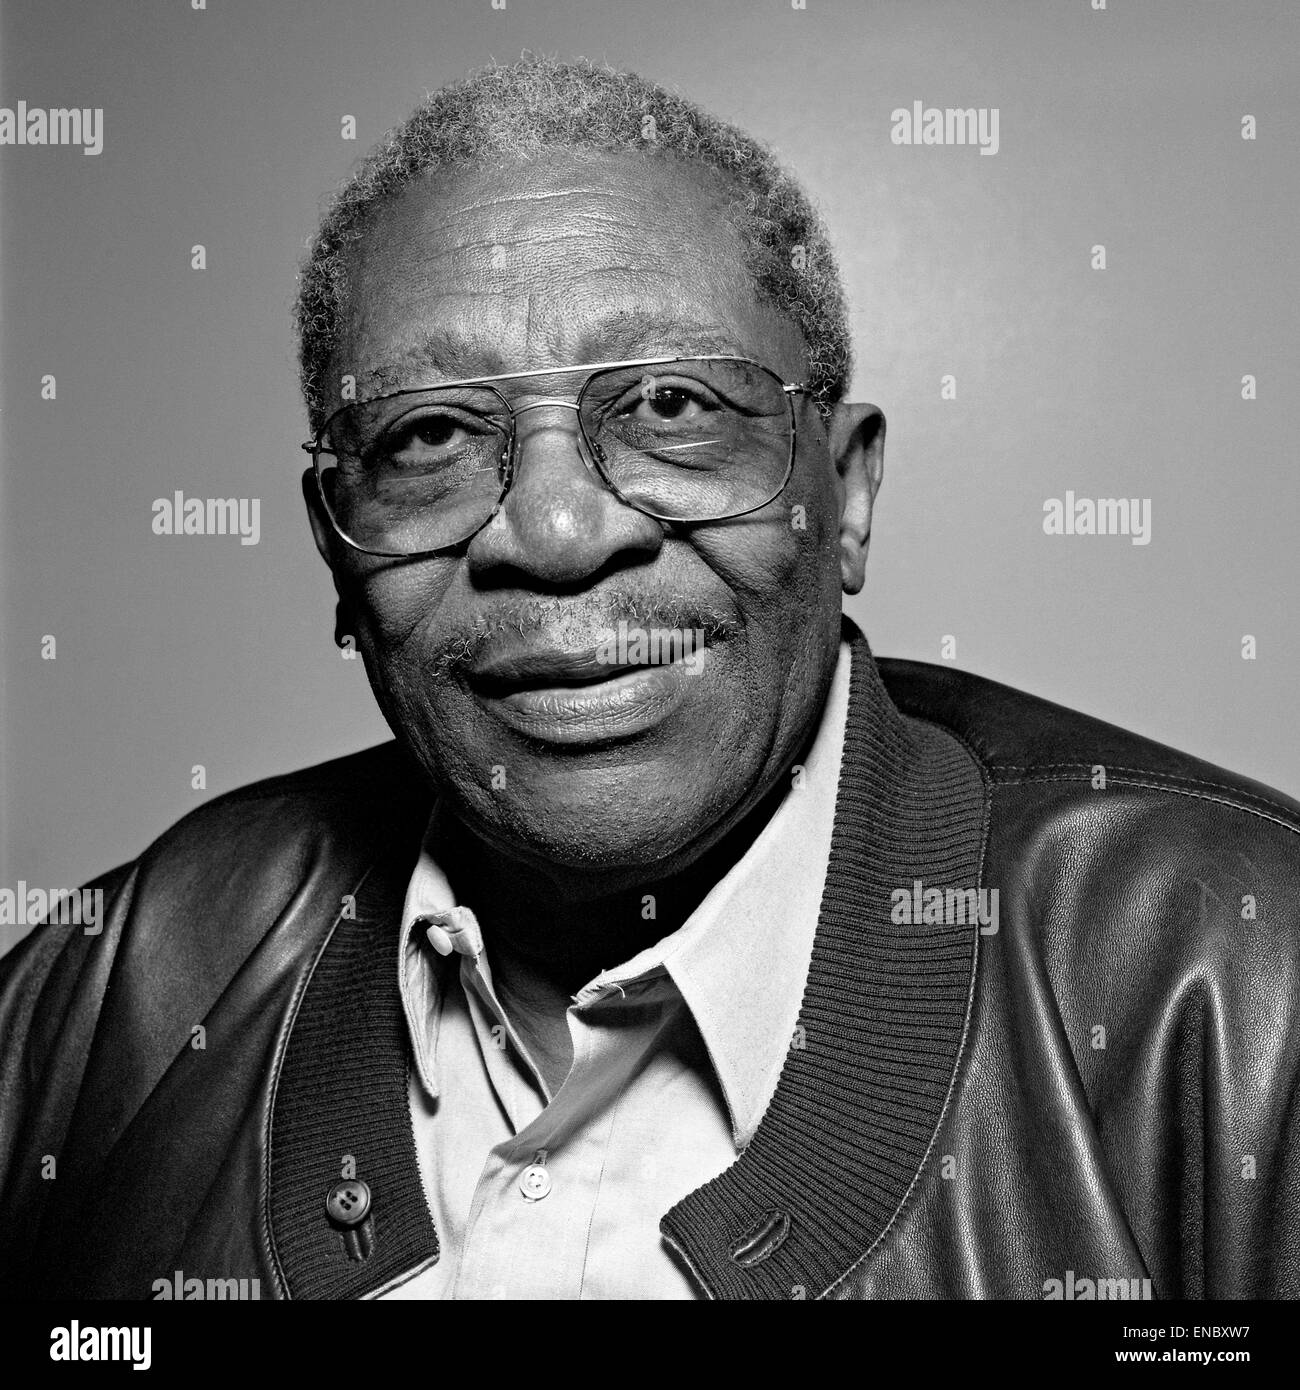 File. 1st May, 2015. Blues legend B.B. KING has entered into hospice care Friday at his home in Las Vegas. The 89-year-old musician posted thanks on his official website for fans' well-wishes and prayers after he returned home from a brief hospitalization, said L. Toney, King's longtime business manager and current power-of-attorney. Pictured: Jun 11, 2007 - Miami, Florida, USA - Musician BB KING photographed in Miami, Florida. (Credit Image: ï¿½ David Jacobs/ZUMA Press) Stock Photo